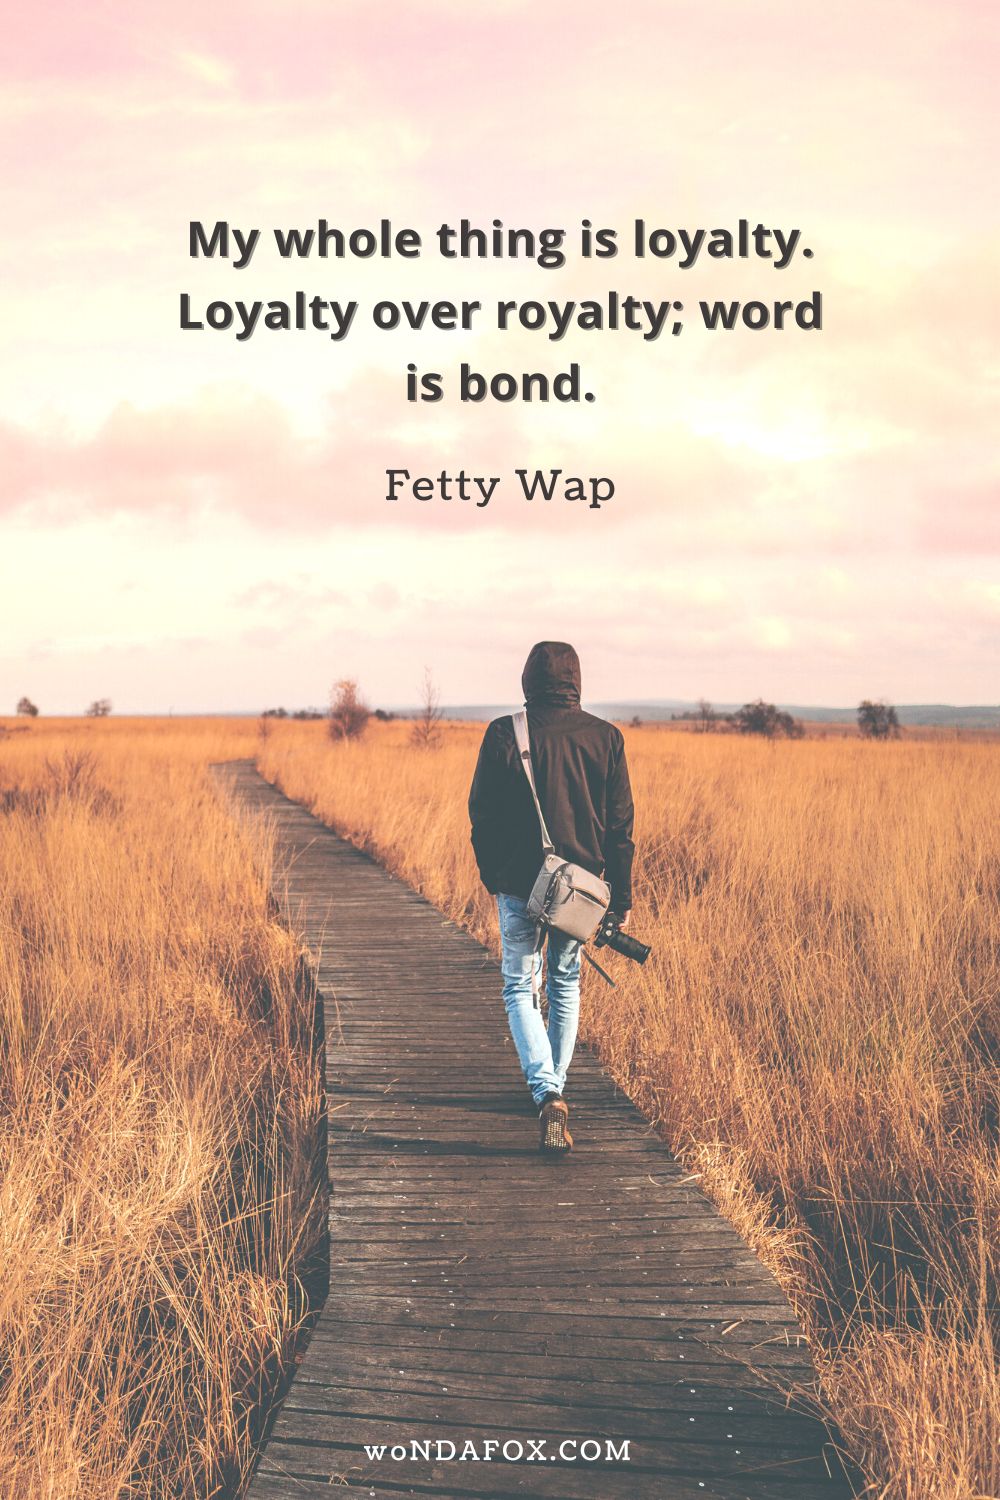 “My whole thing is loyalty. Loyalty over royalty; word is bond.